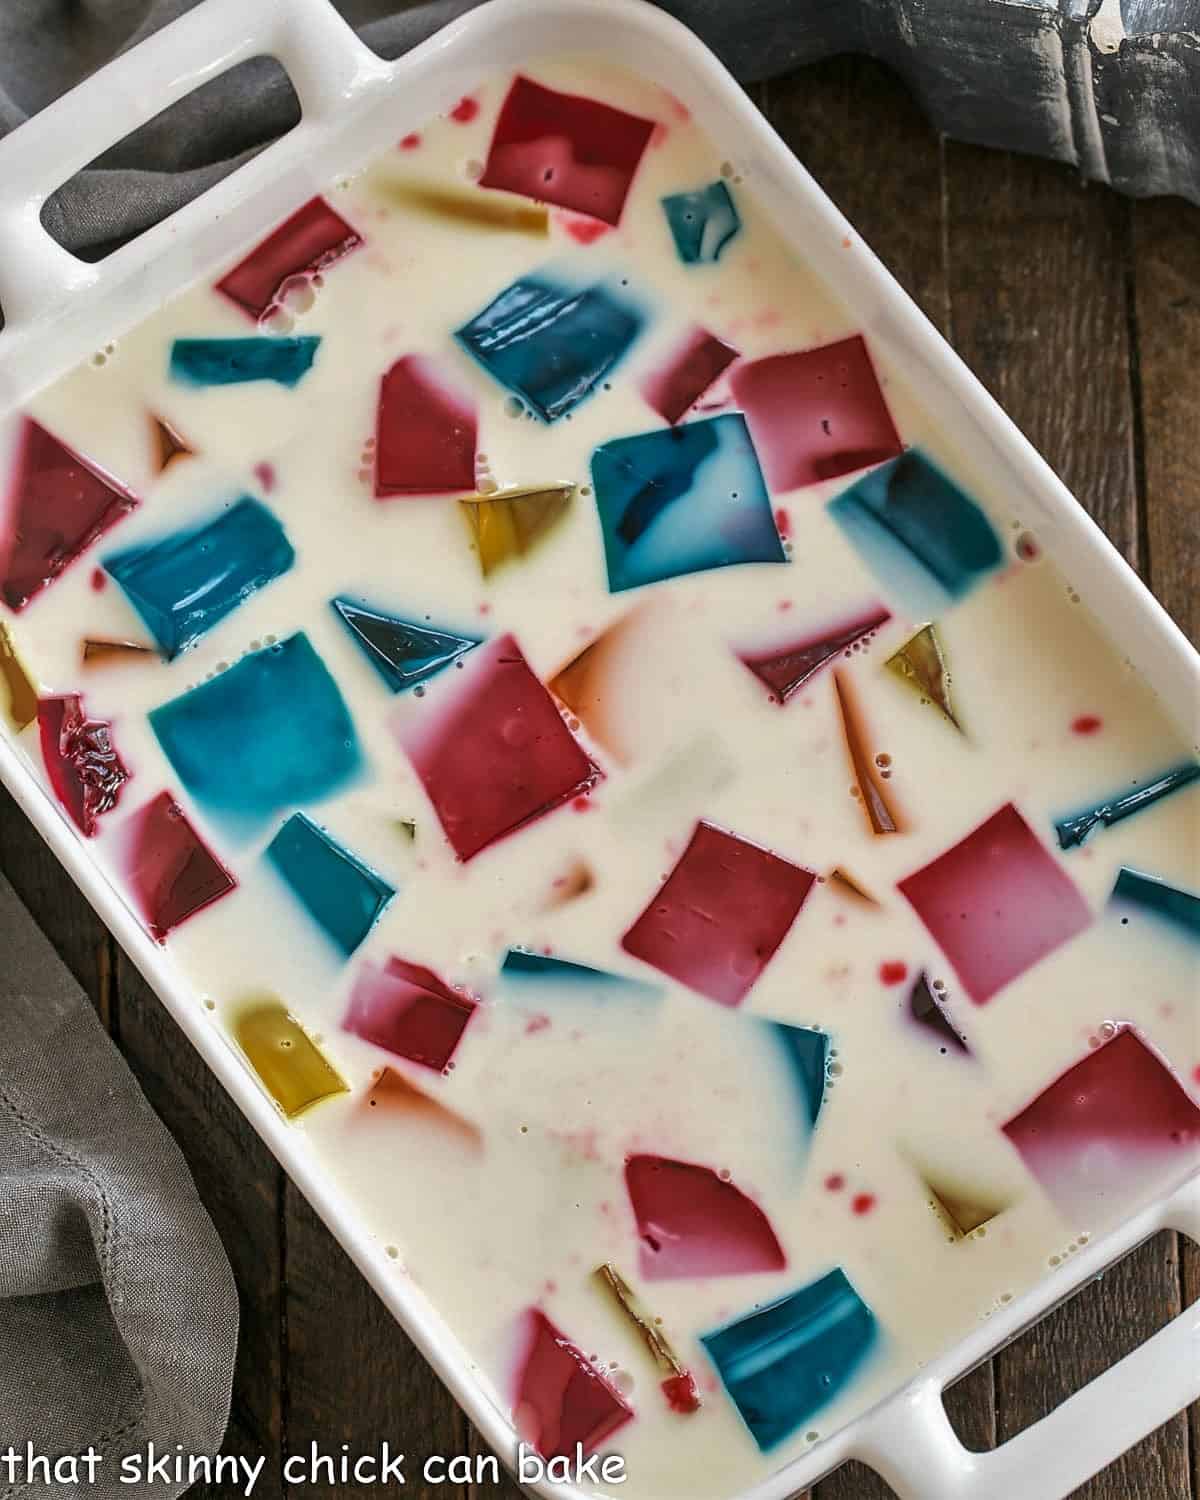 Overview of stained glass jello in a white casserole dish.